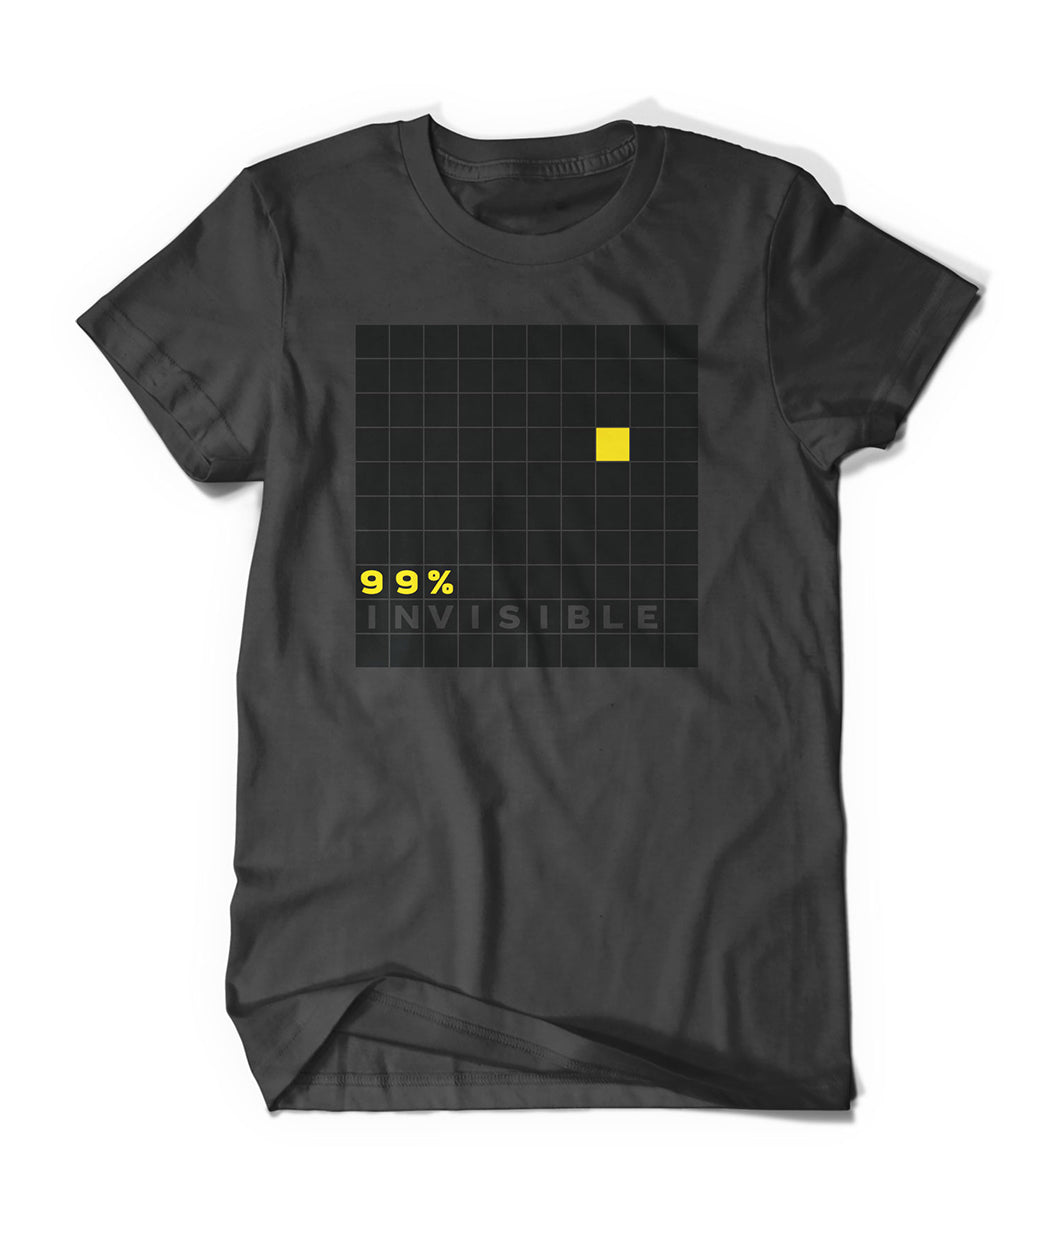 Grey t-shirt with large grid of all black squares except for 1 yellow and the words "99% Invisible" in yellow and grey - by 99% Invisible